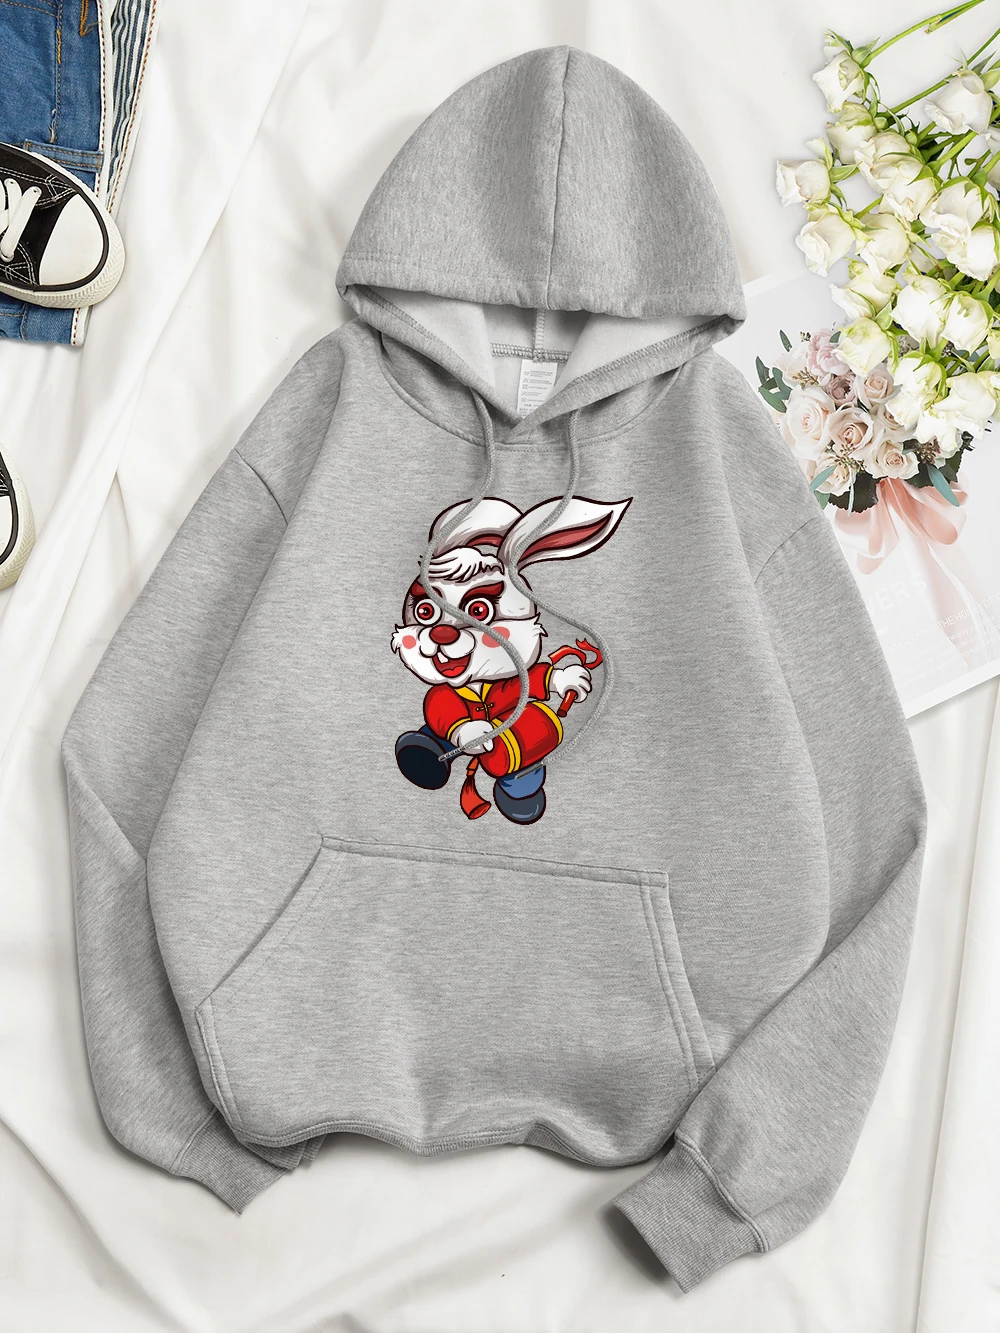 

Rabbit Plays Waist Drum To Celebrate The New Year Printed Woman Cotton Pullover Casual Comfortable Sweatshirt Soft Womens Hoodie